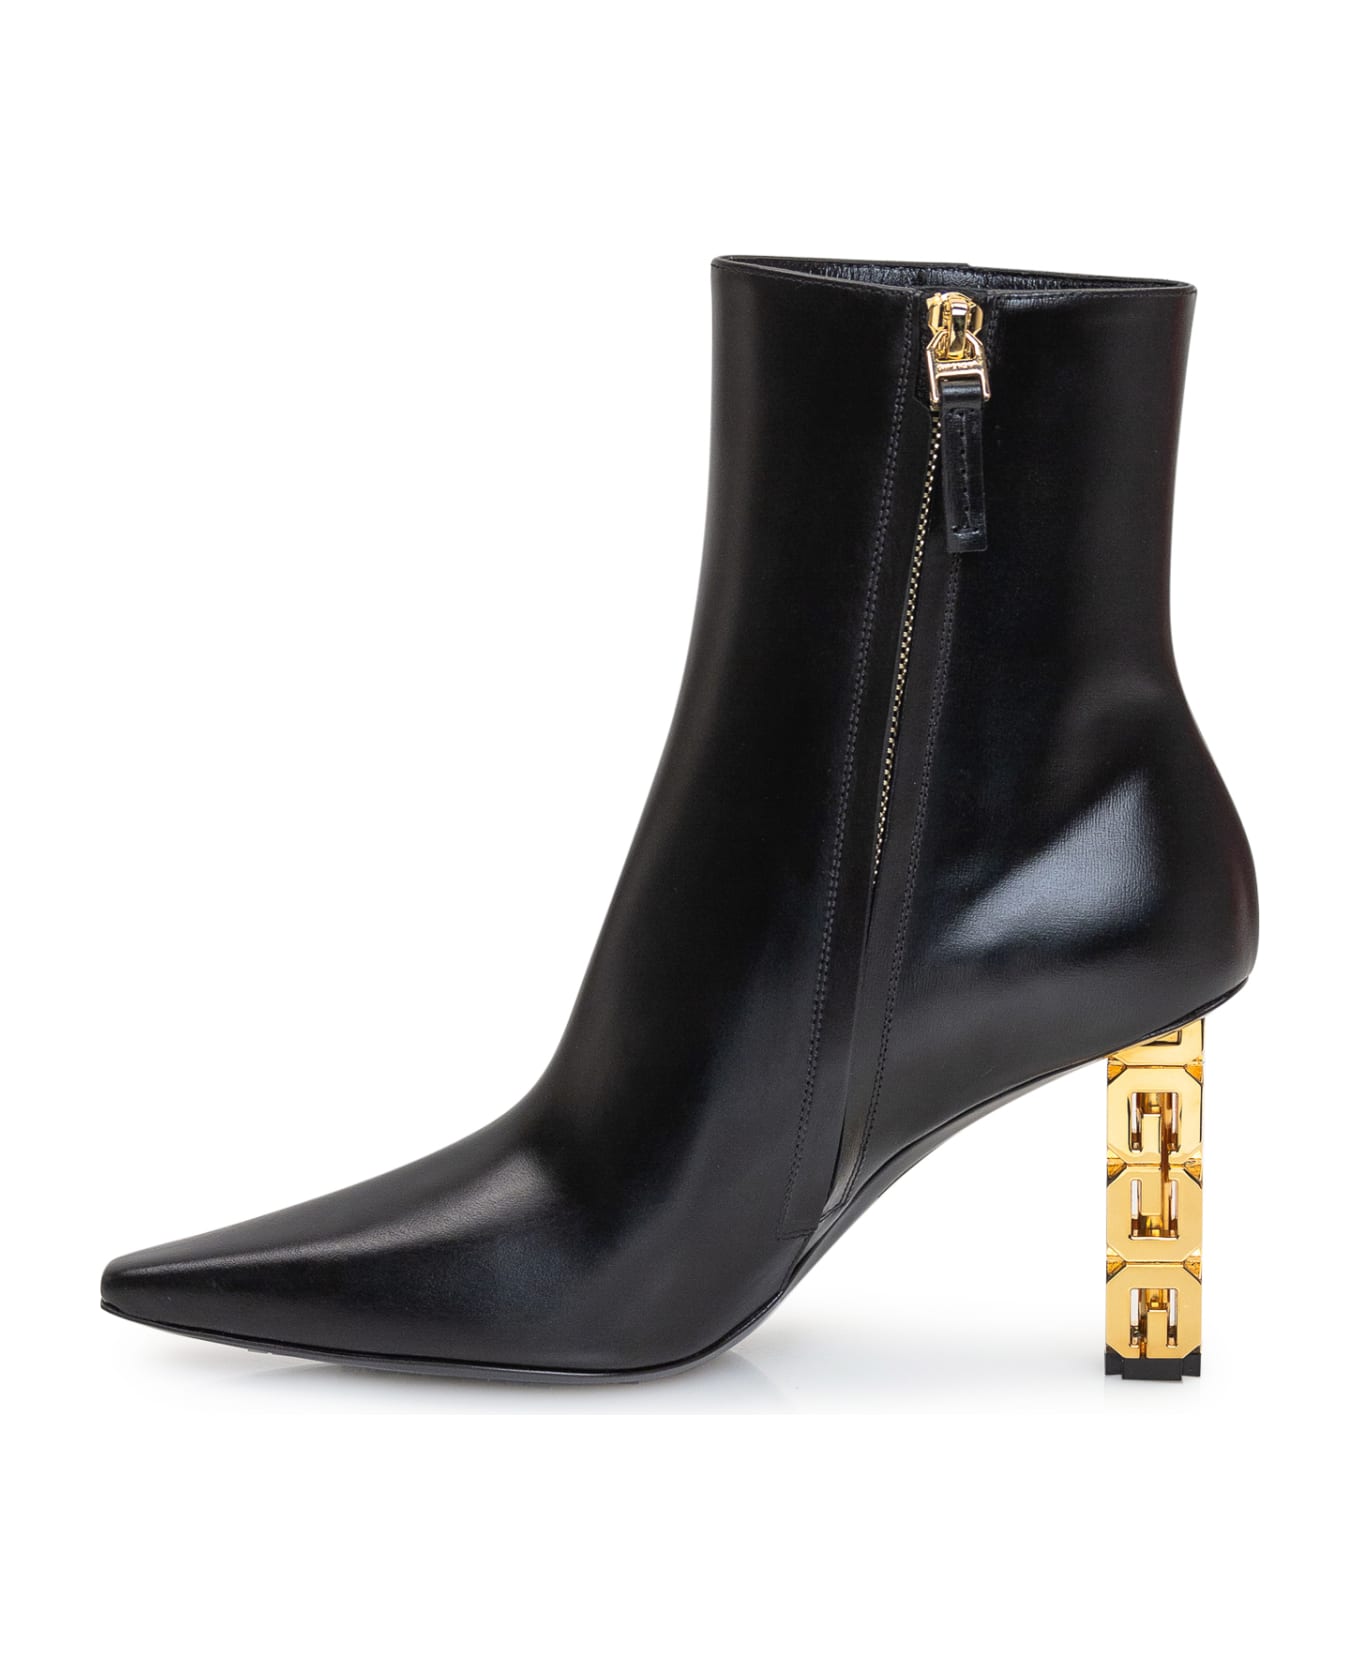 Givenchy G Cube Ankle Boot - BLACK ブーツ